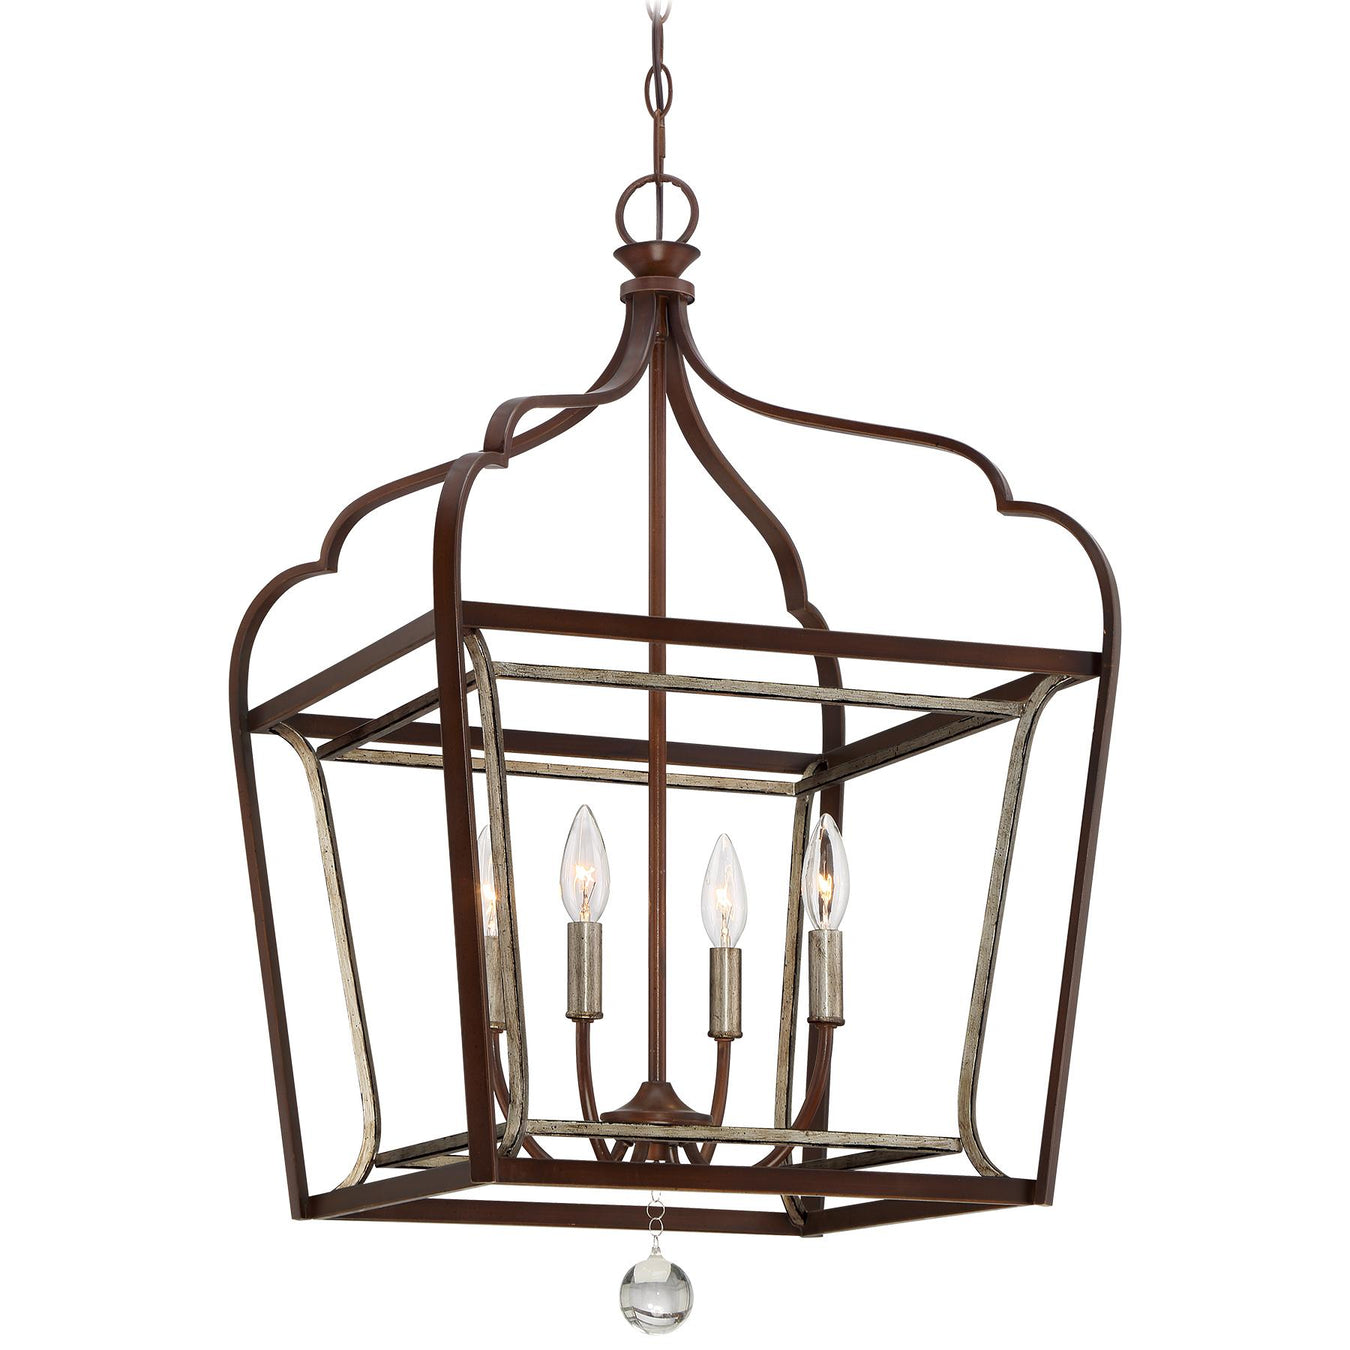 Astrapia 4-Light Foyer Pendant in Dark Rubbed Sienna with Aged Silver & Clear Acrylic Glass - Lamps Expo